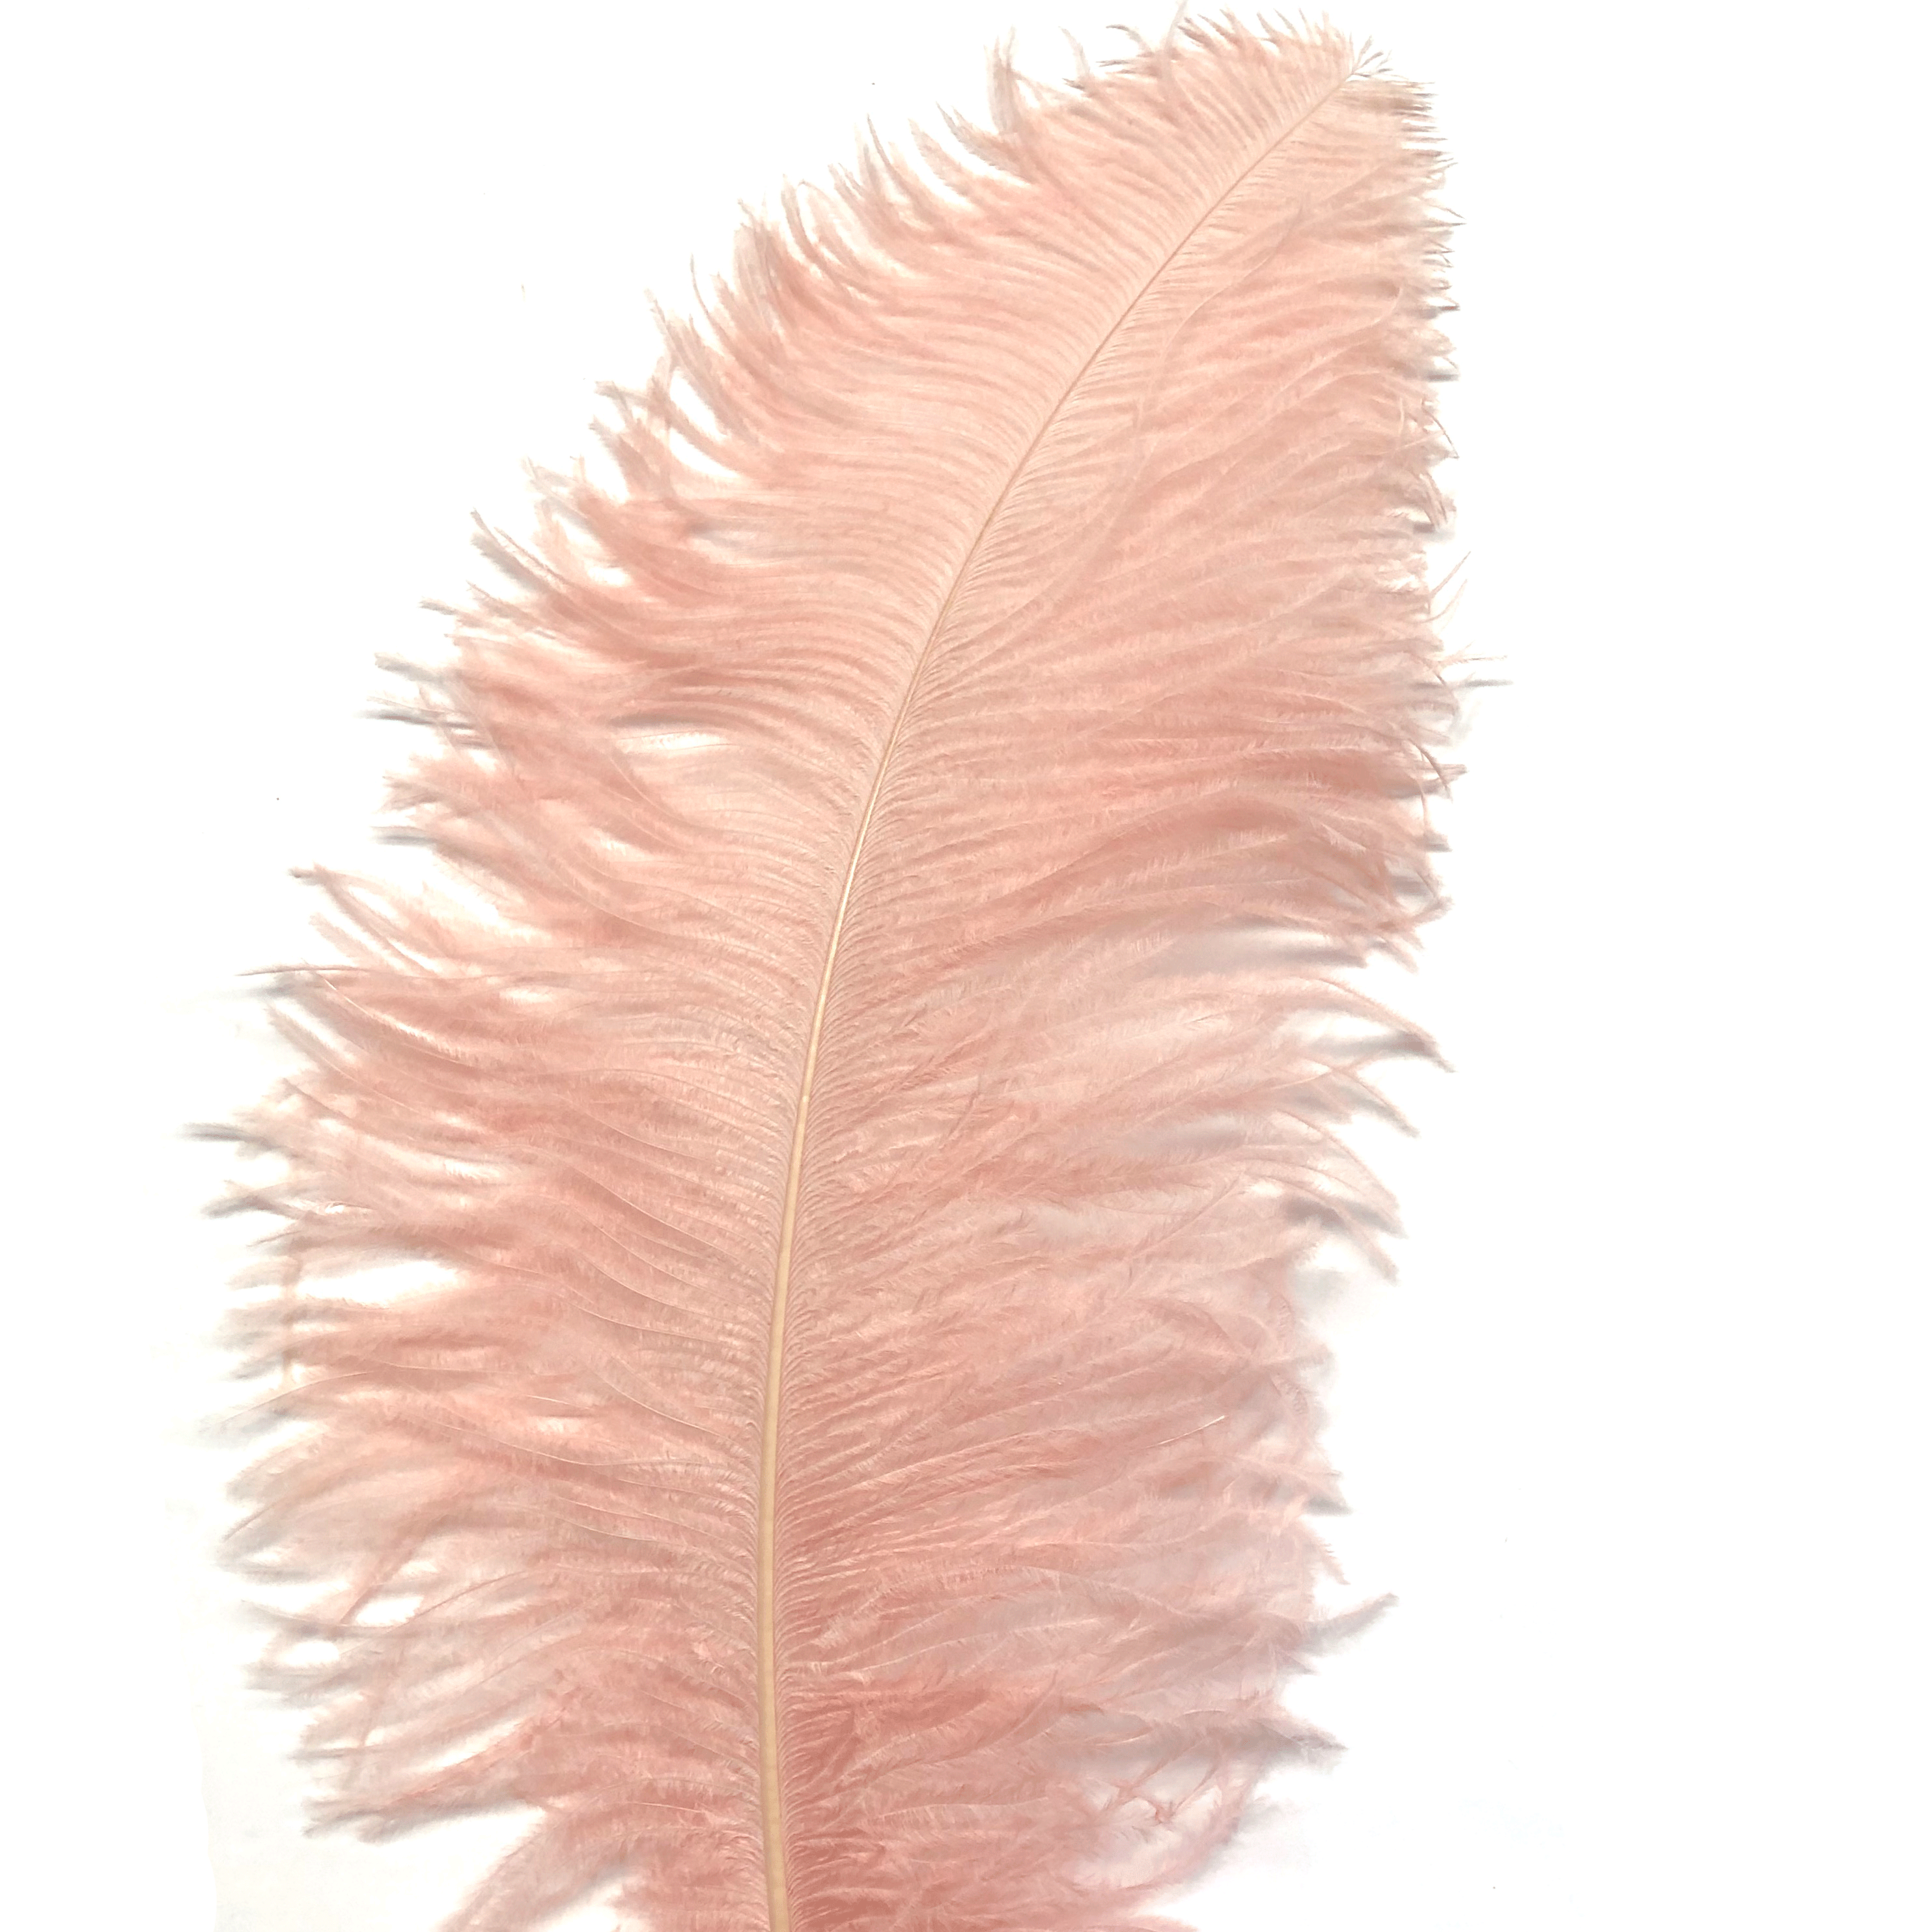 Ostrich Wing Feather Plumes 50-55cm (20-22") - Blush Pink ((SECONDS))